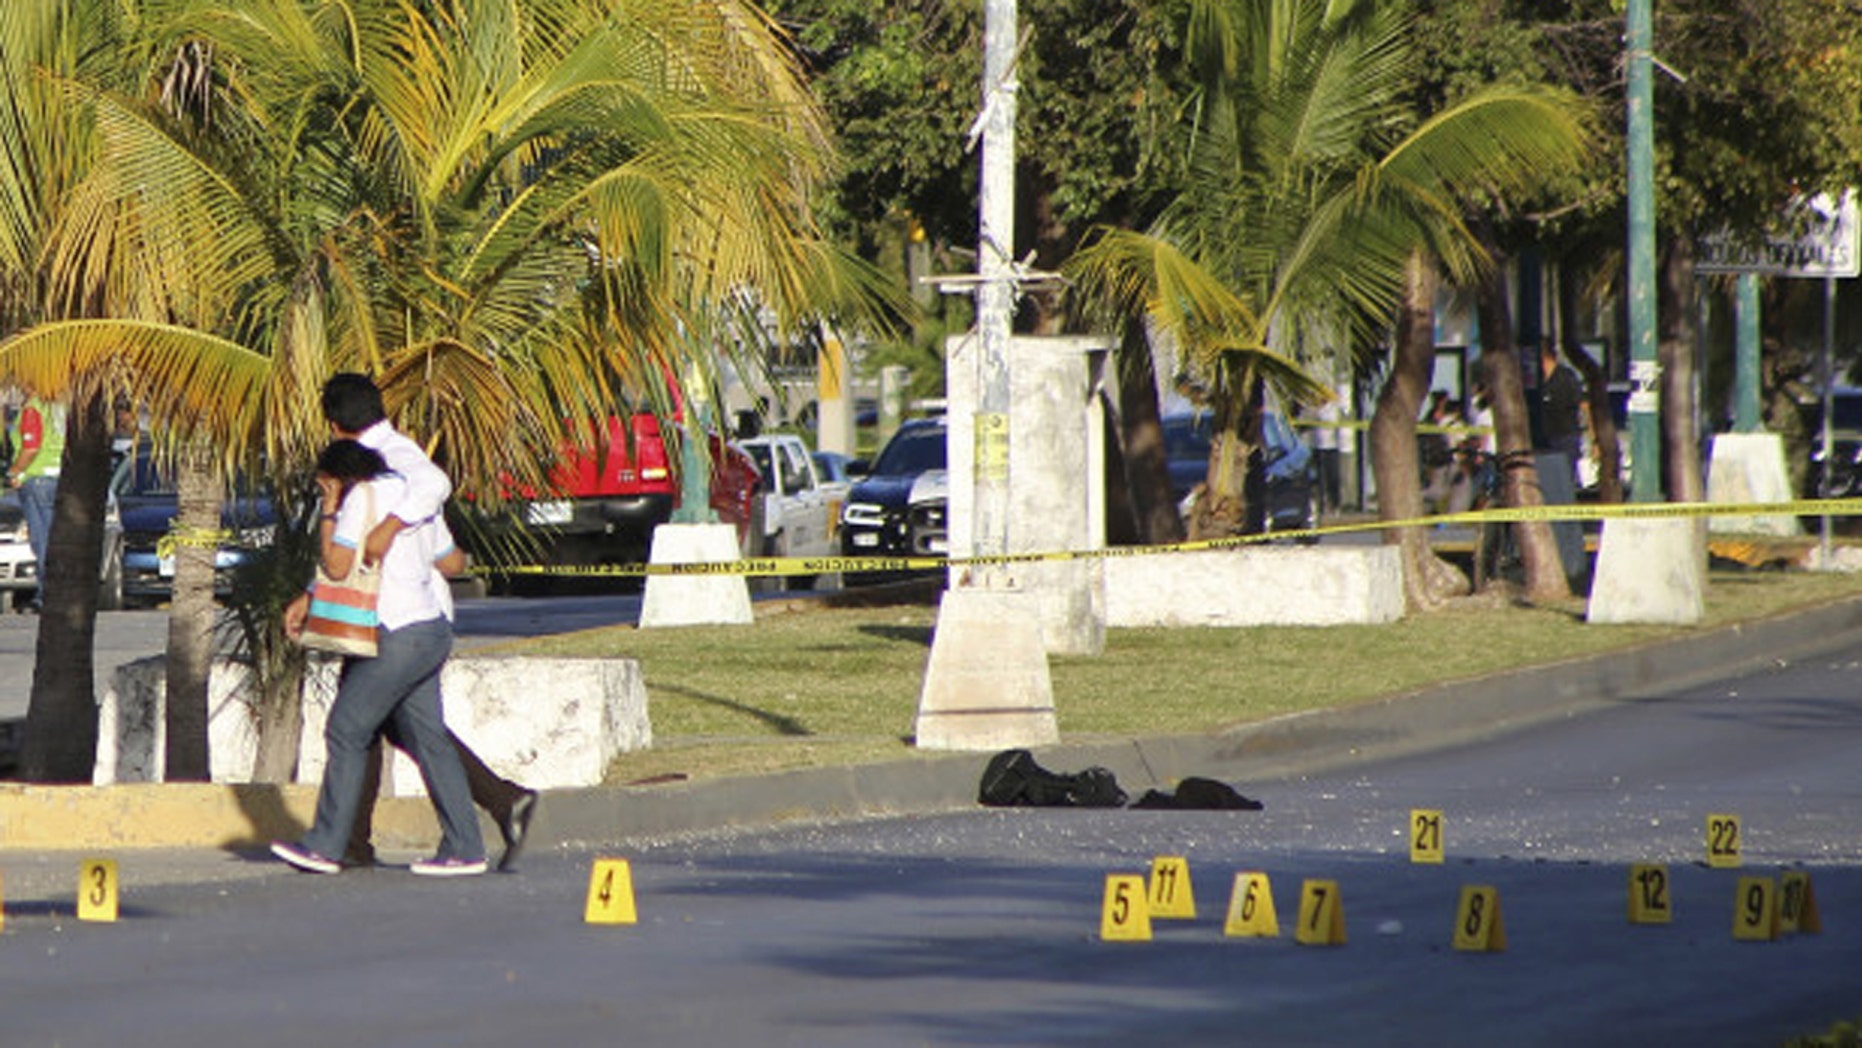 Streets of Cancun run red with 14 murders in 36 hours Fox News